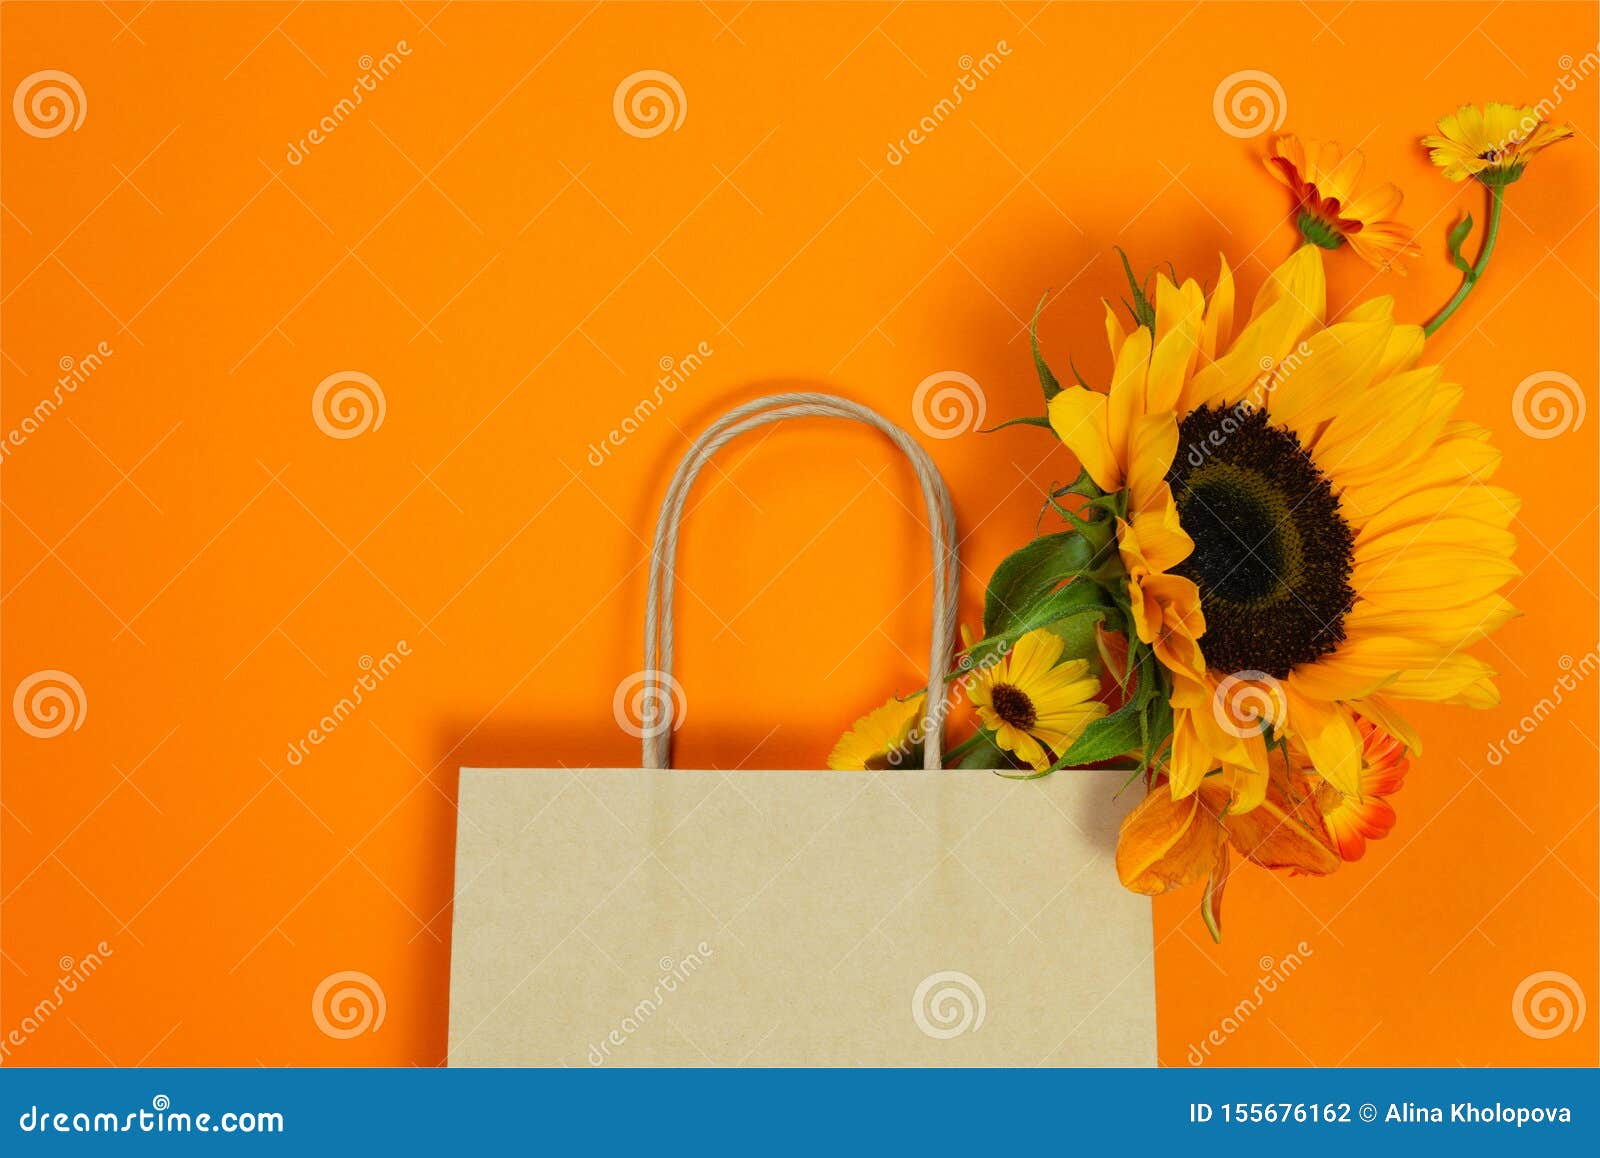 Craft Paper Bag with Autumn Bouquet with Sunflower Stock Photo - Image ...